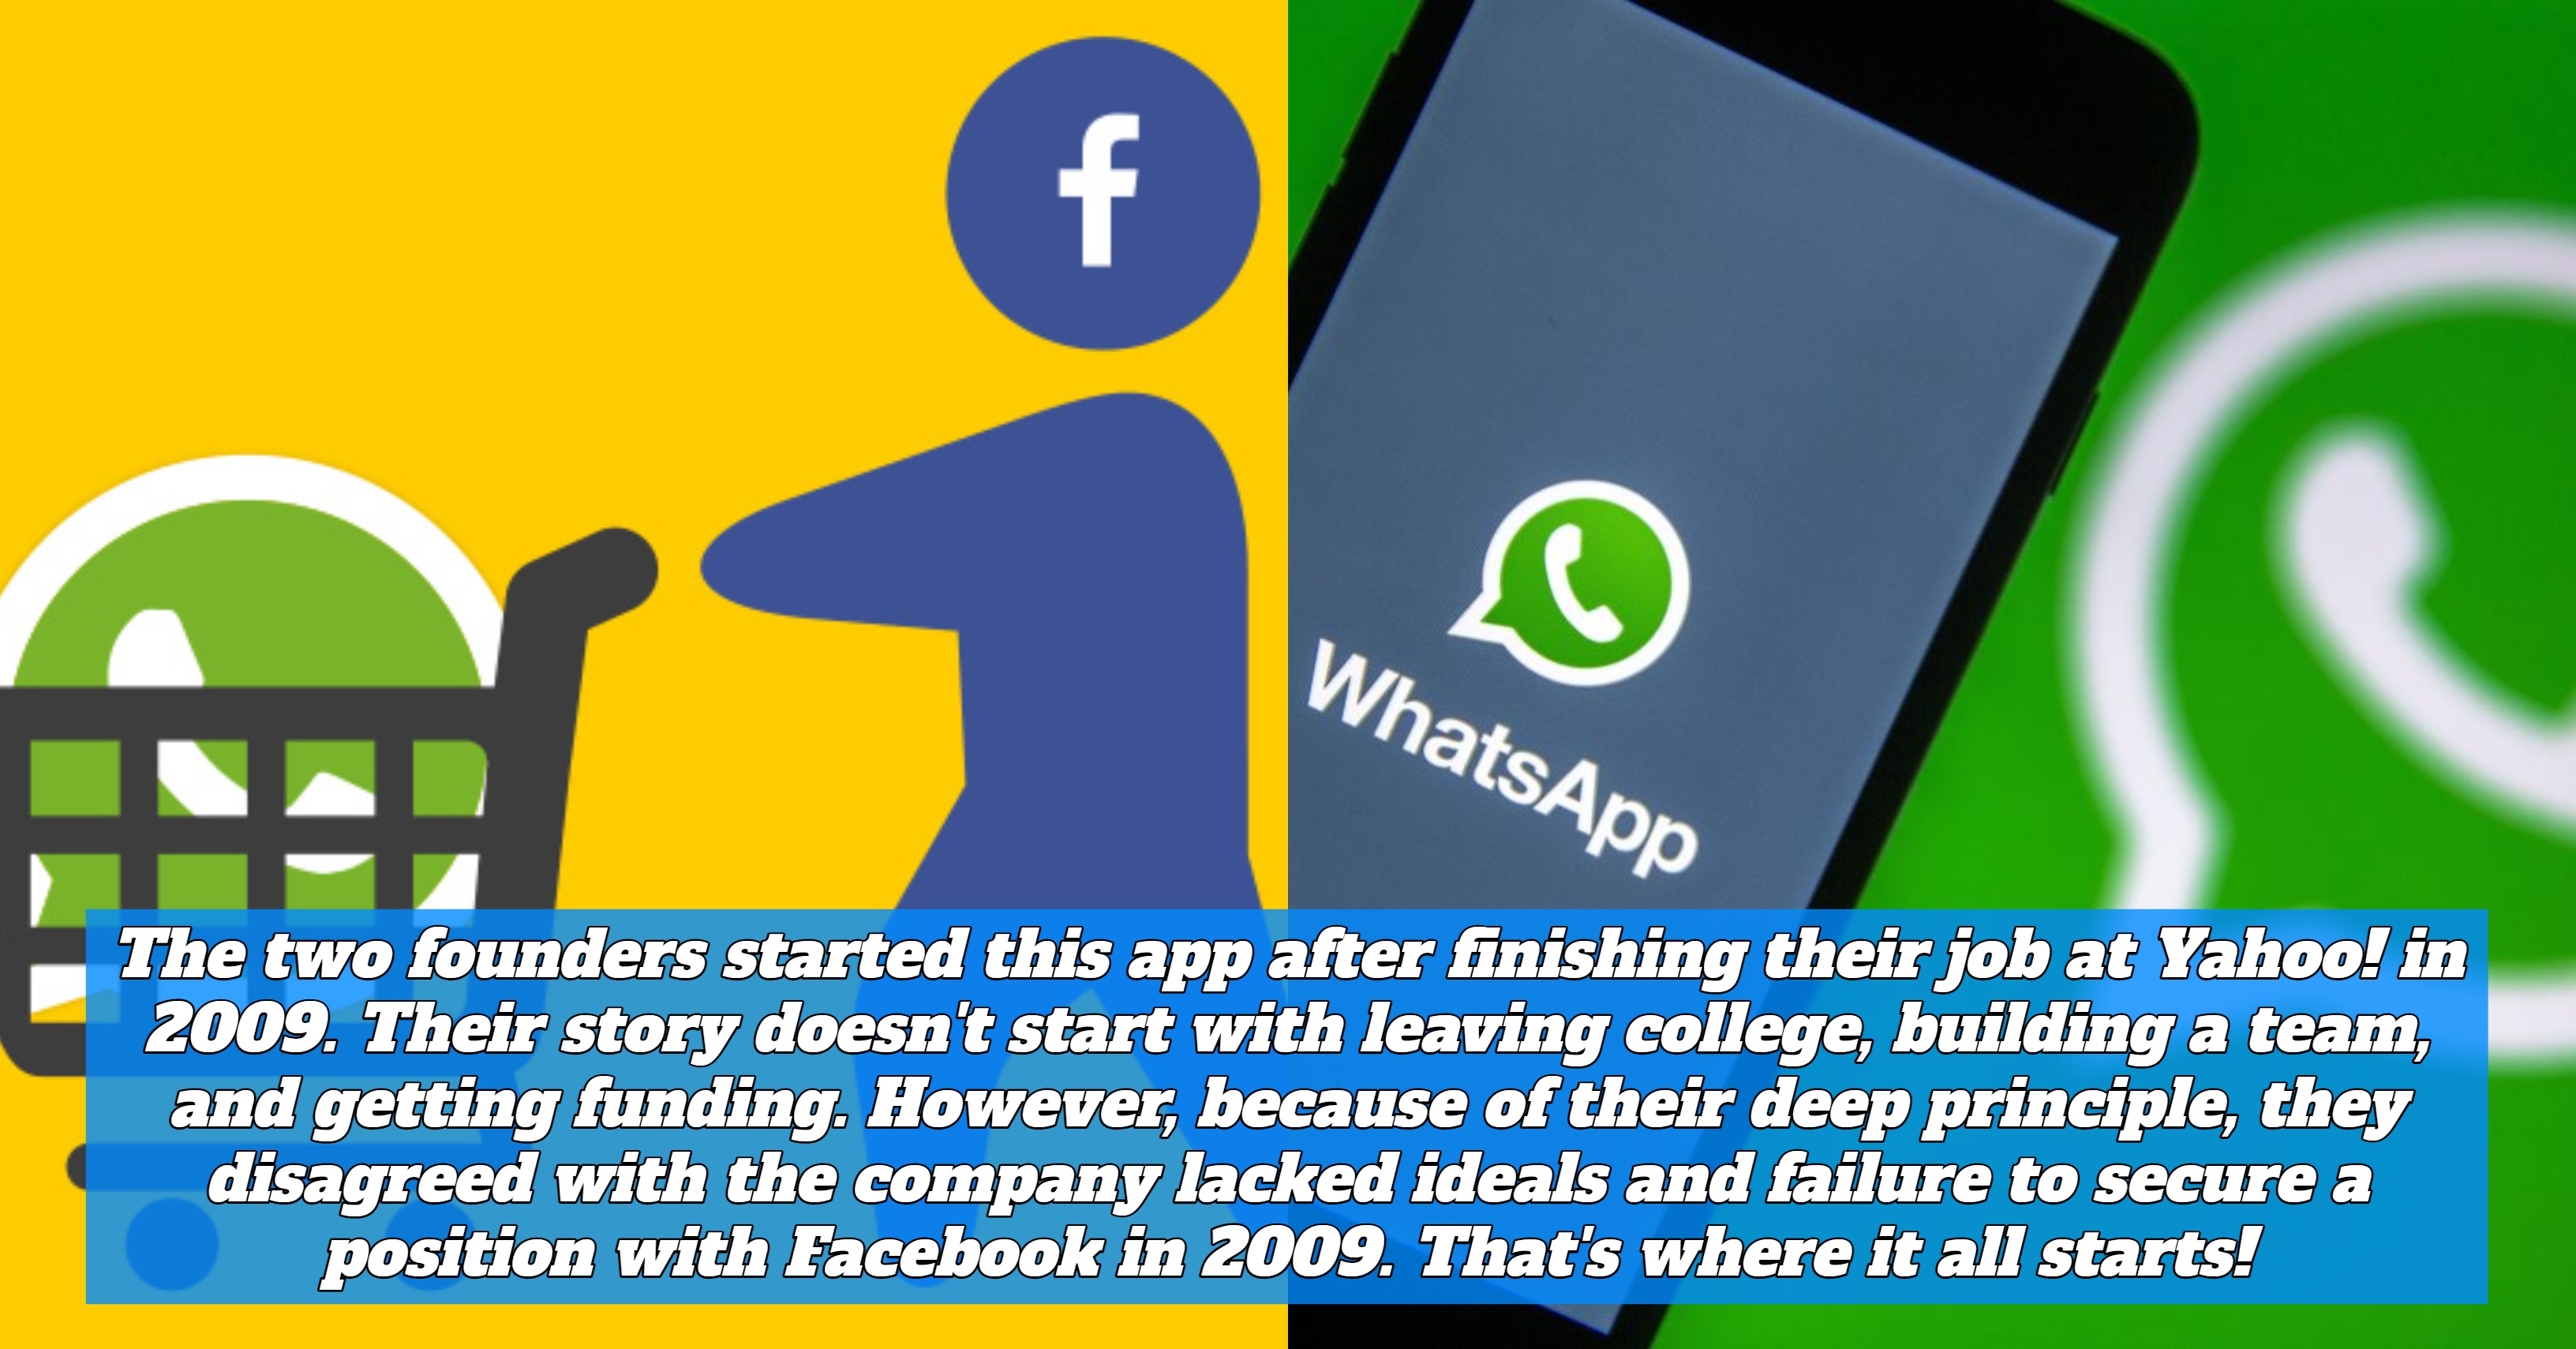 Initially, WhatsApp set up its stance not to run ads, charge the user, or sell user data. That was the founder's main tenet at the